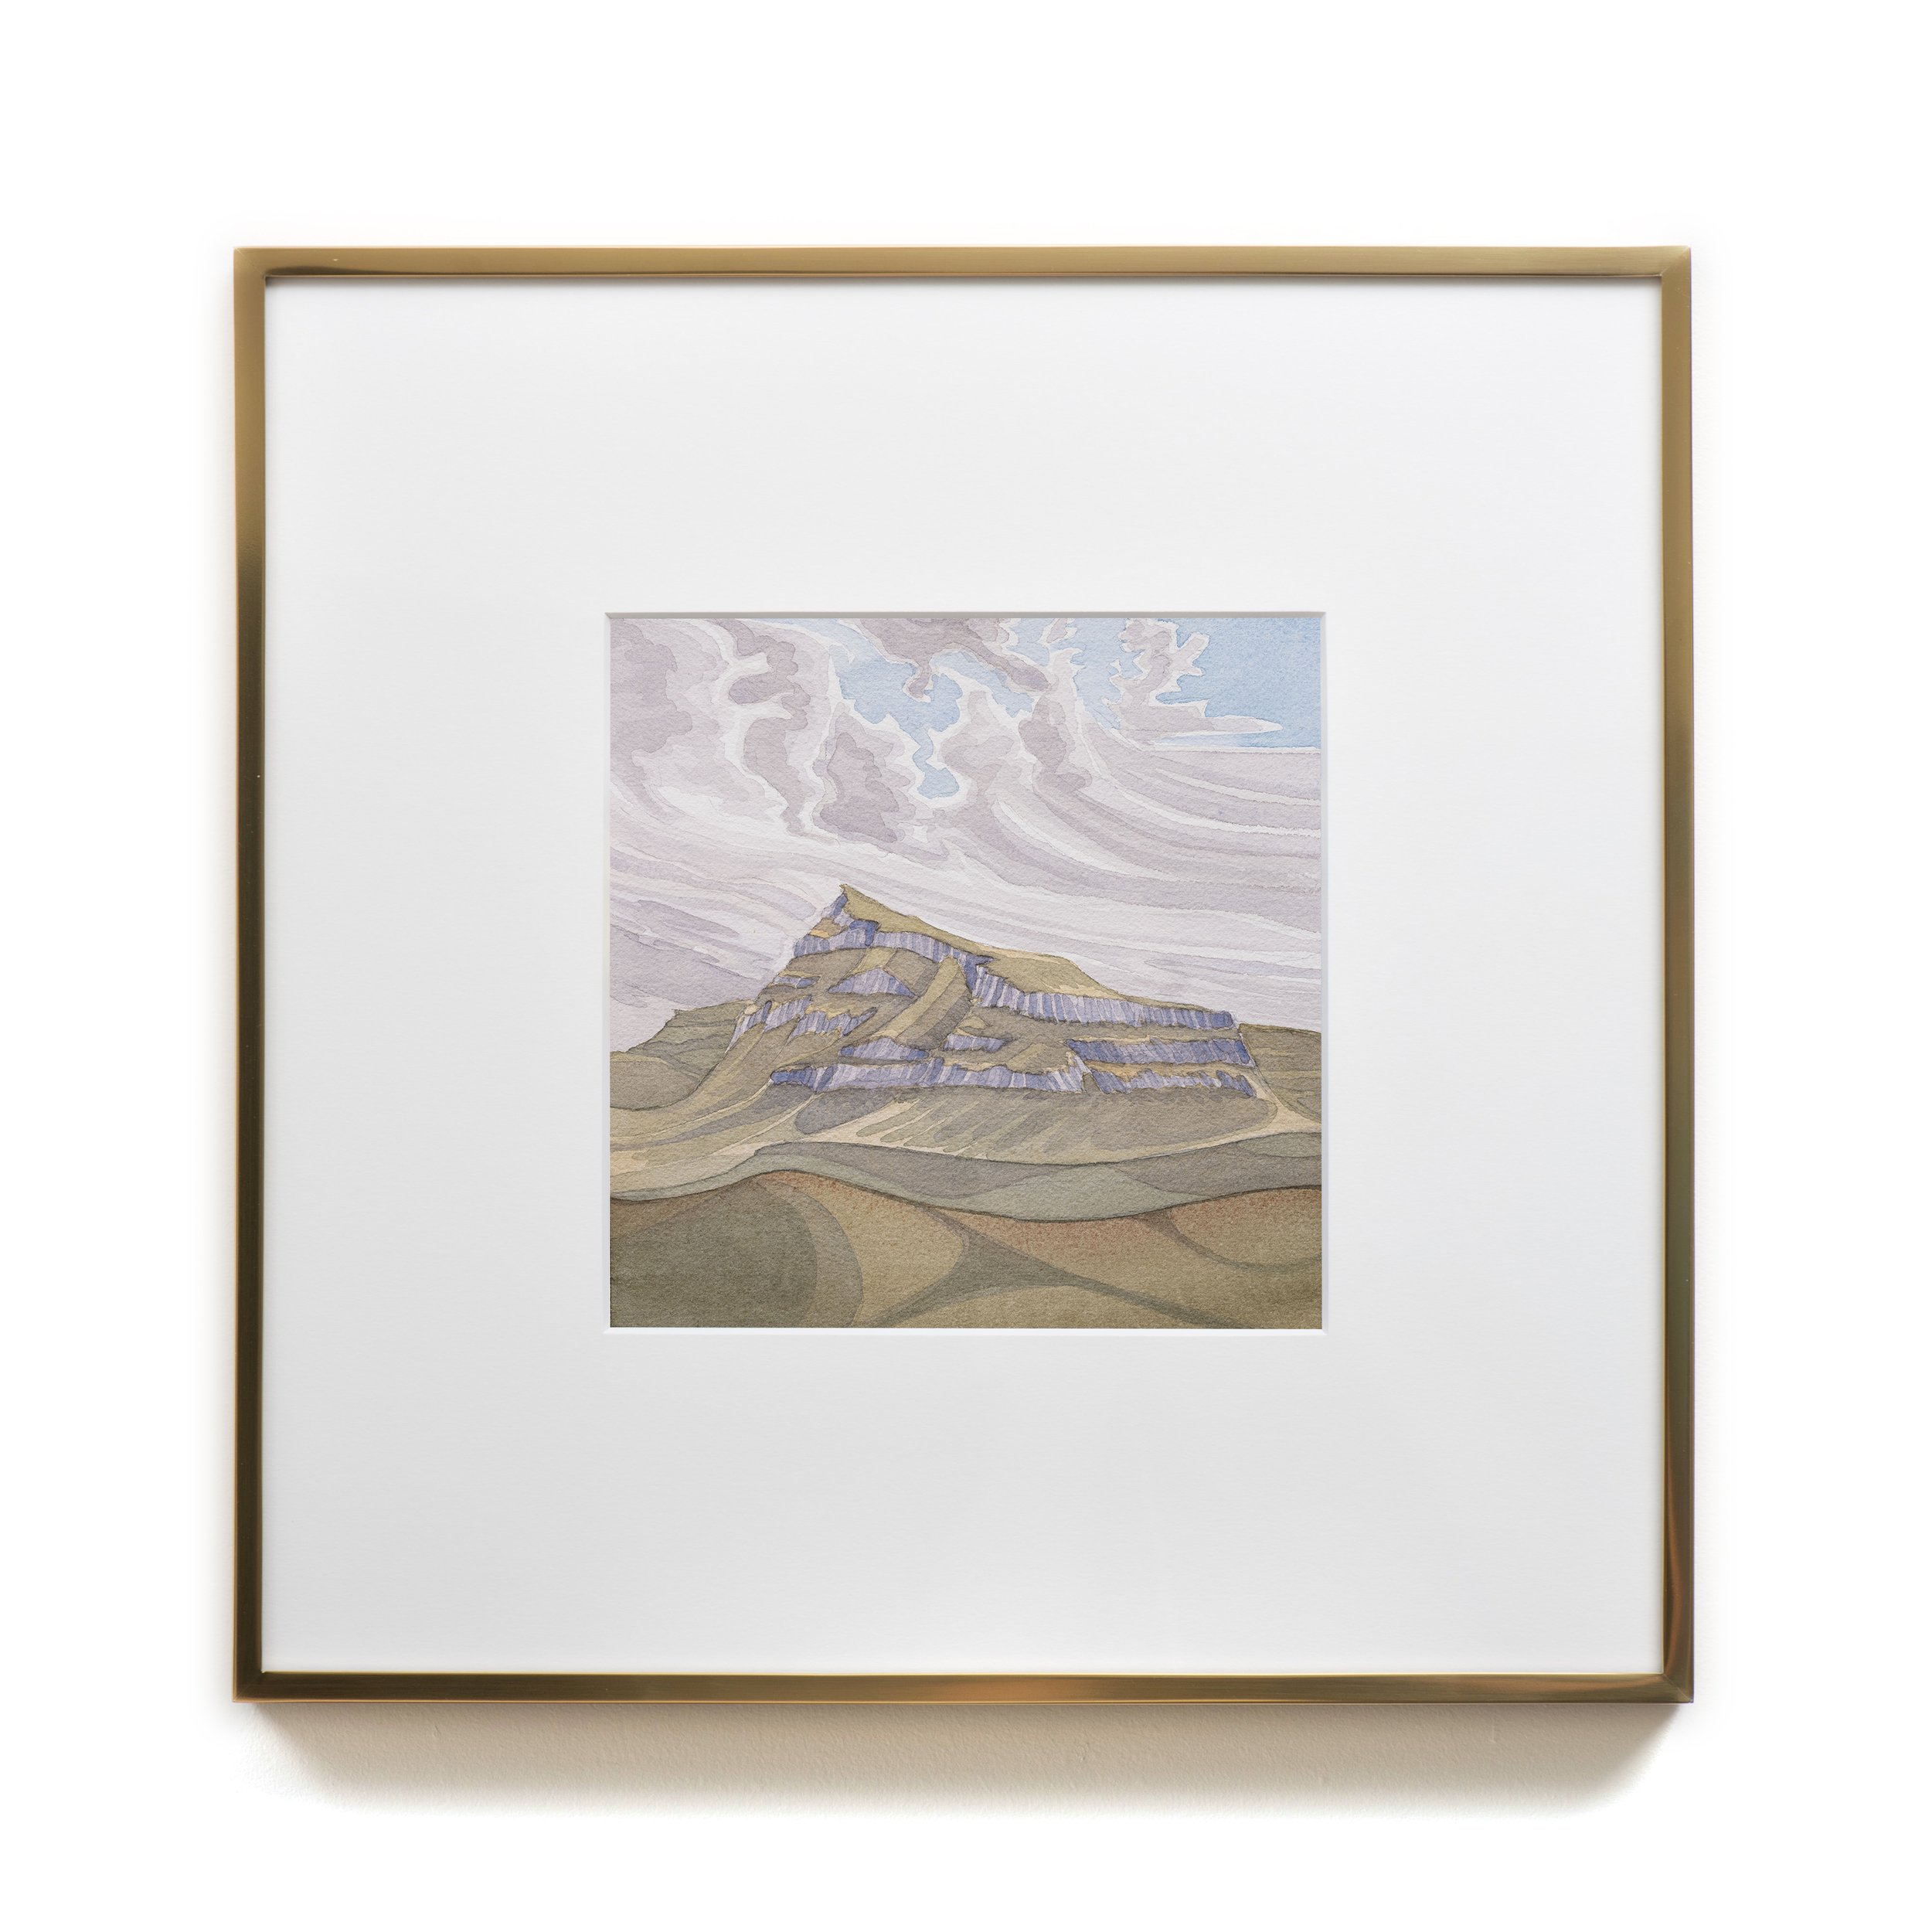   Beinn Edra , 2022 Watercolor on paper 16 x 16 x 1 1/2 inches (framed) 